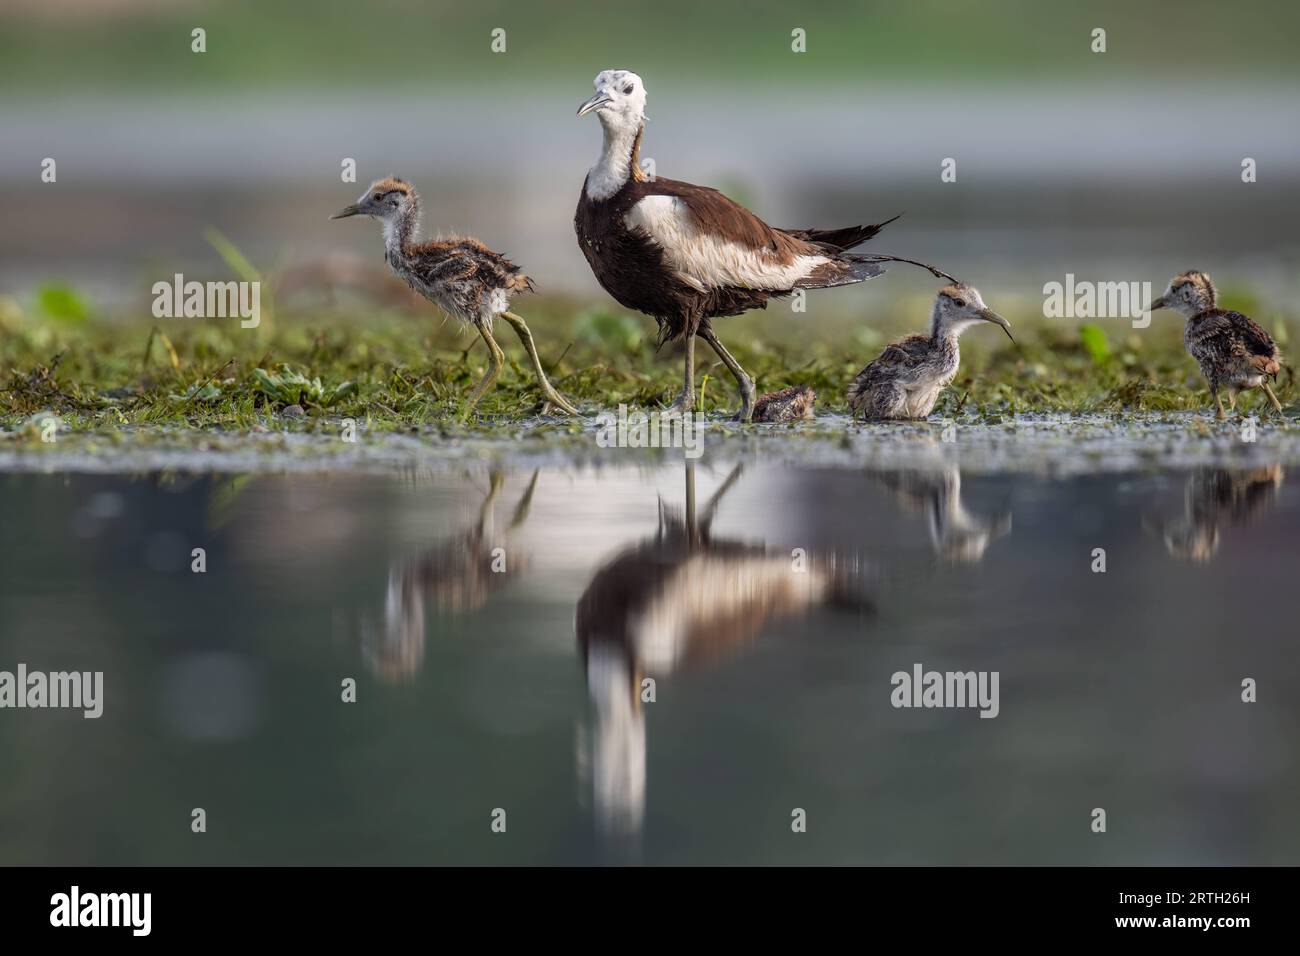 Father pheasant jacana walking on water and moss with his chicks playing nearby. West Bengal, India: CUTE images of pheasant tailed Jacanas chicks see Stock Photo